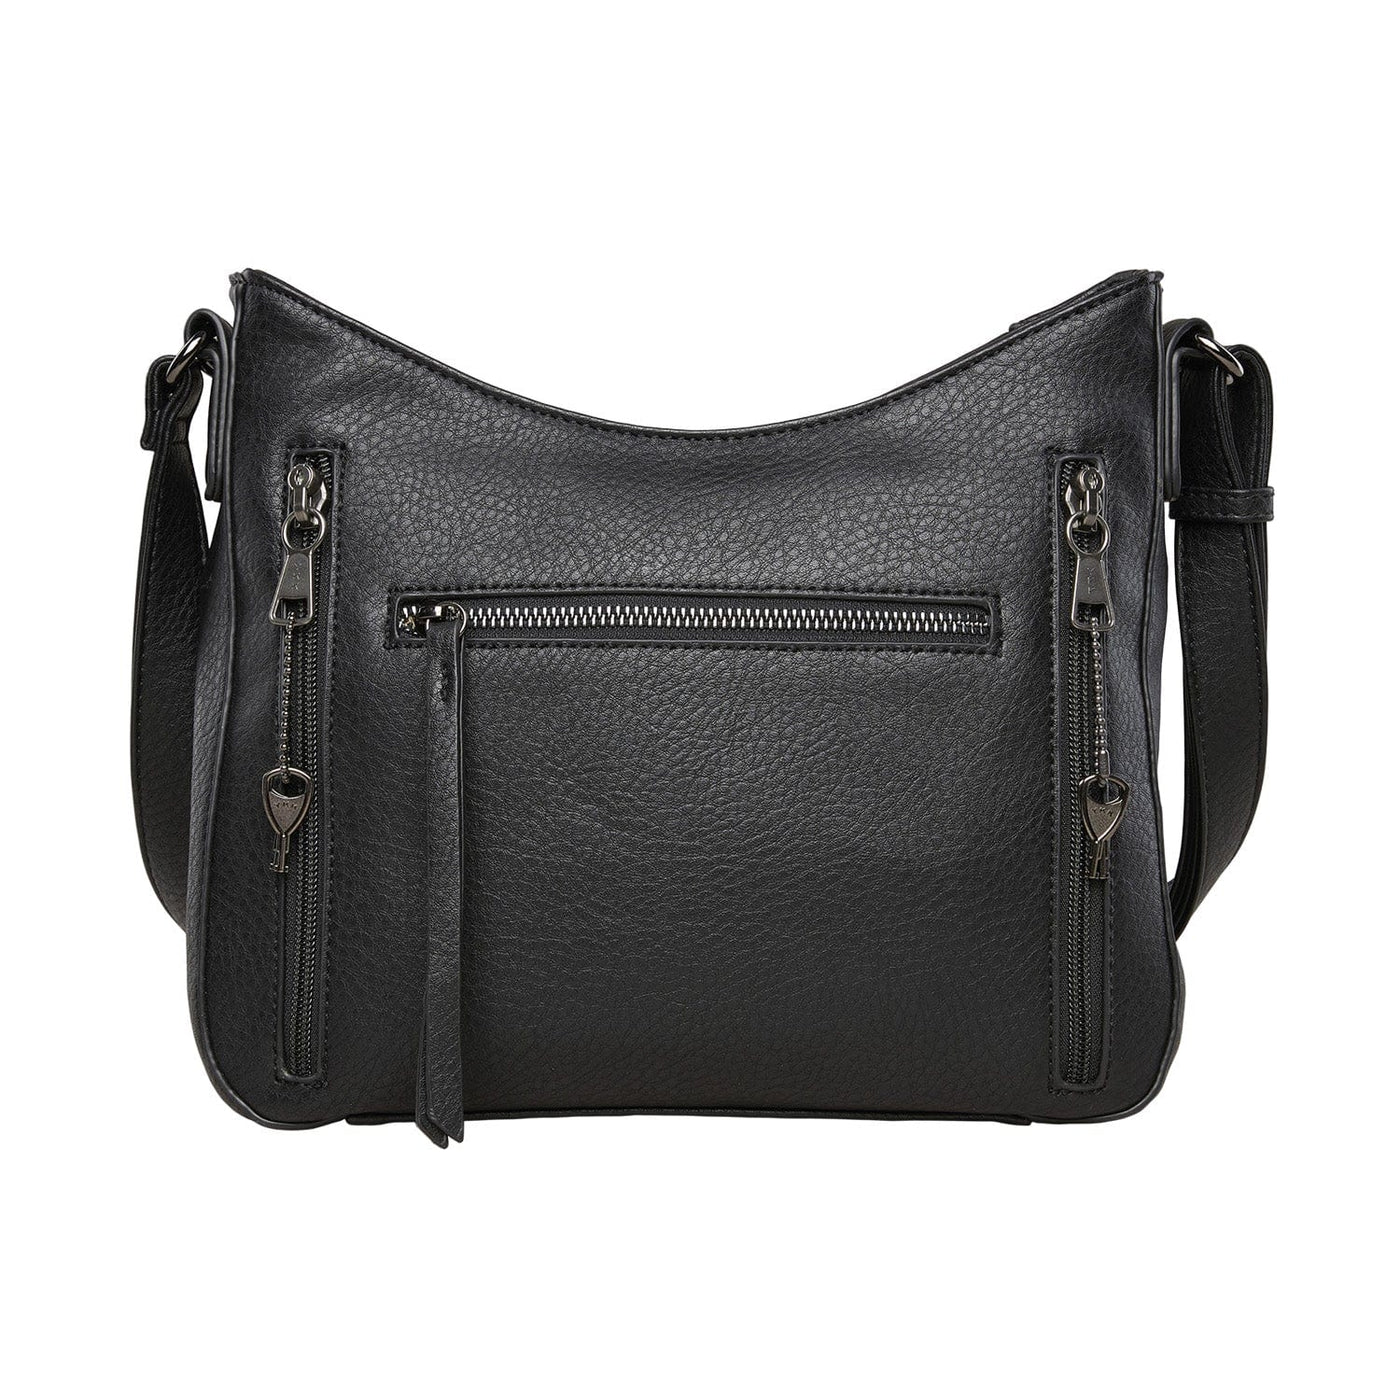 Concealed Carry Emery Crossbody Wallet-  YKK Locking Zippered Bag -  Easy Conceal Carry -  CCW Purse for Women -  concealed carry Handbag for woman -  Conceal and Carry purse for Handgun -   Designer Luxury Conceal Carry Handbag -  Unique Hide Handbag Gun and Pistol Bag -  carry Handbag for concealed gun carry -  Unique Emery gun Handbag -  Crossbody with RFID Slim Wallet 